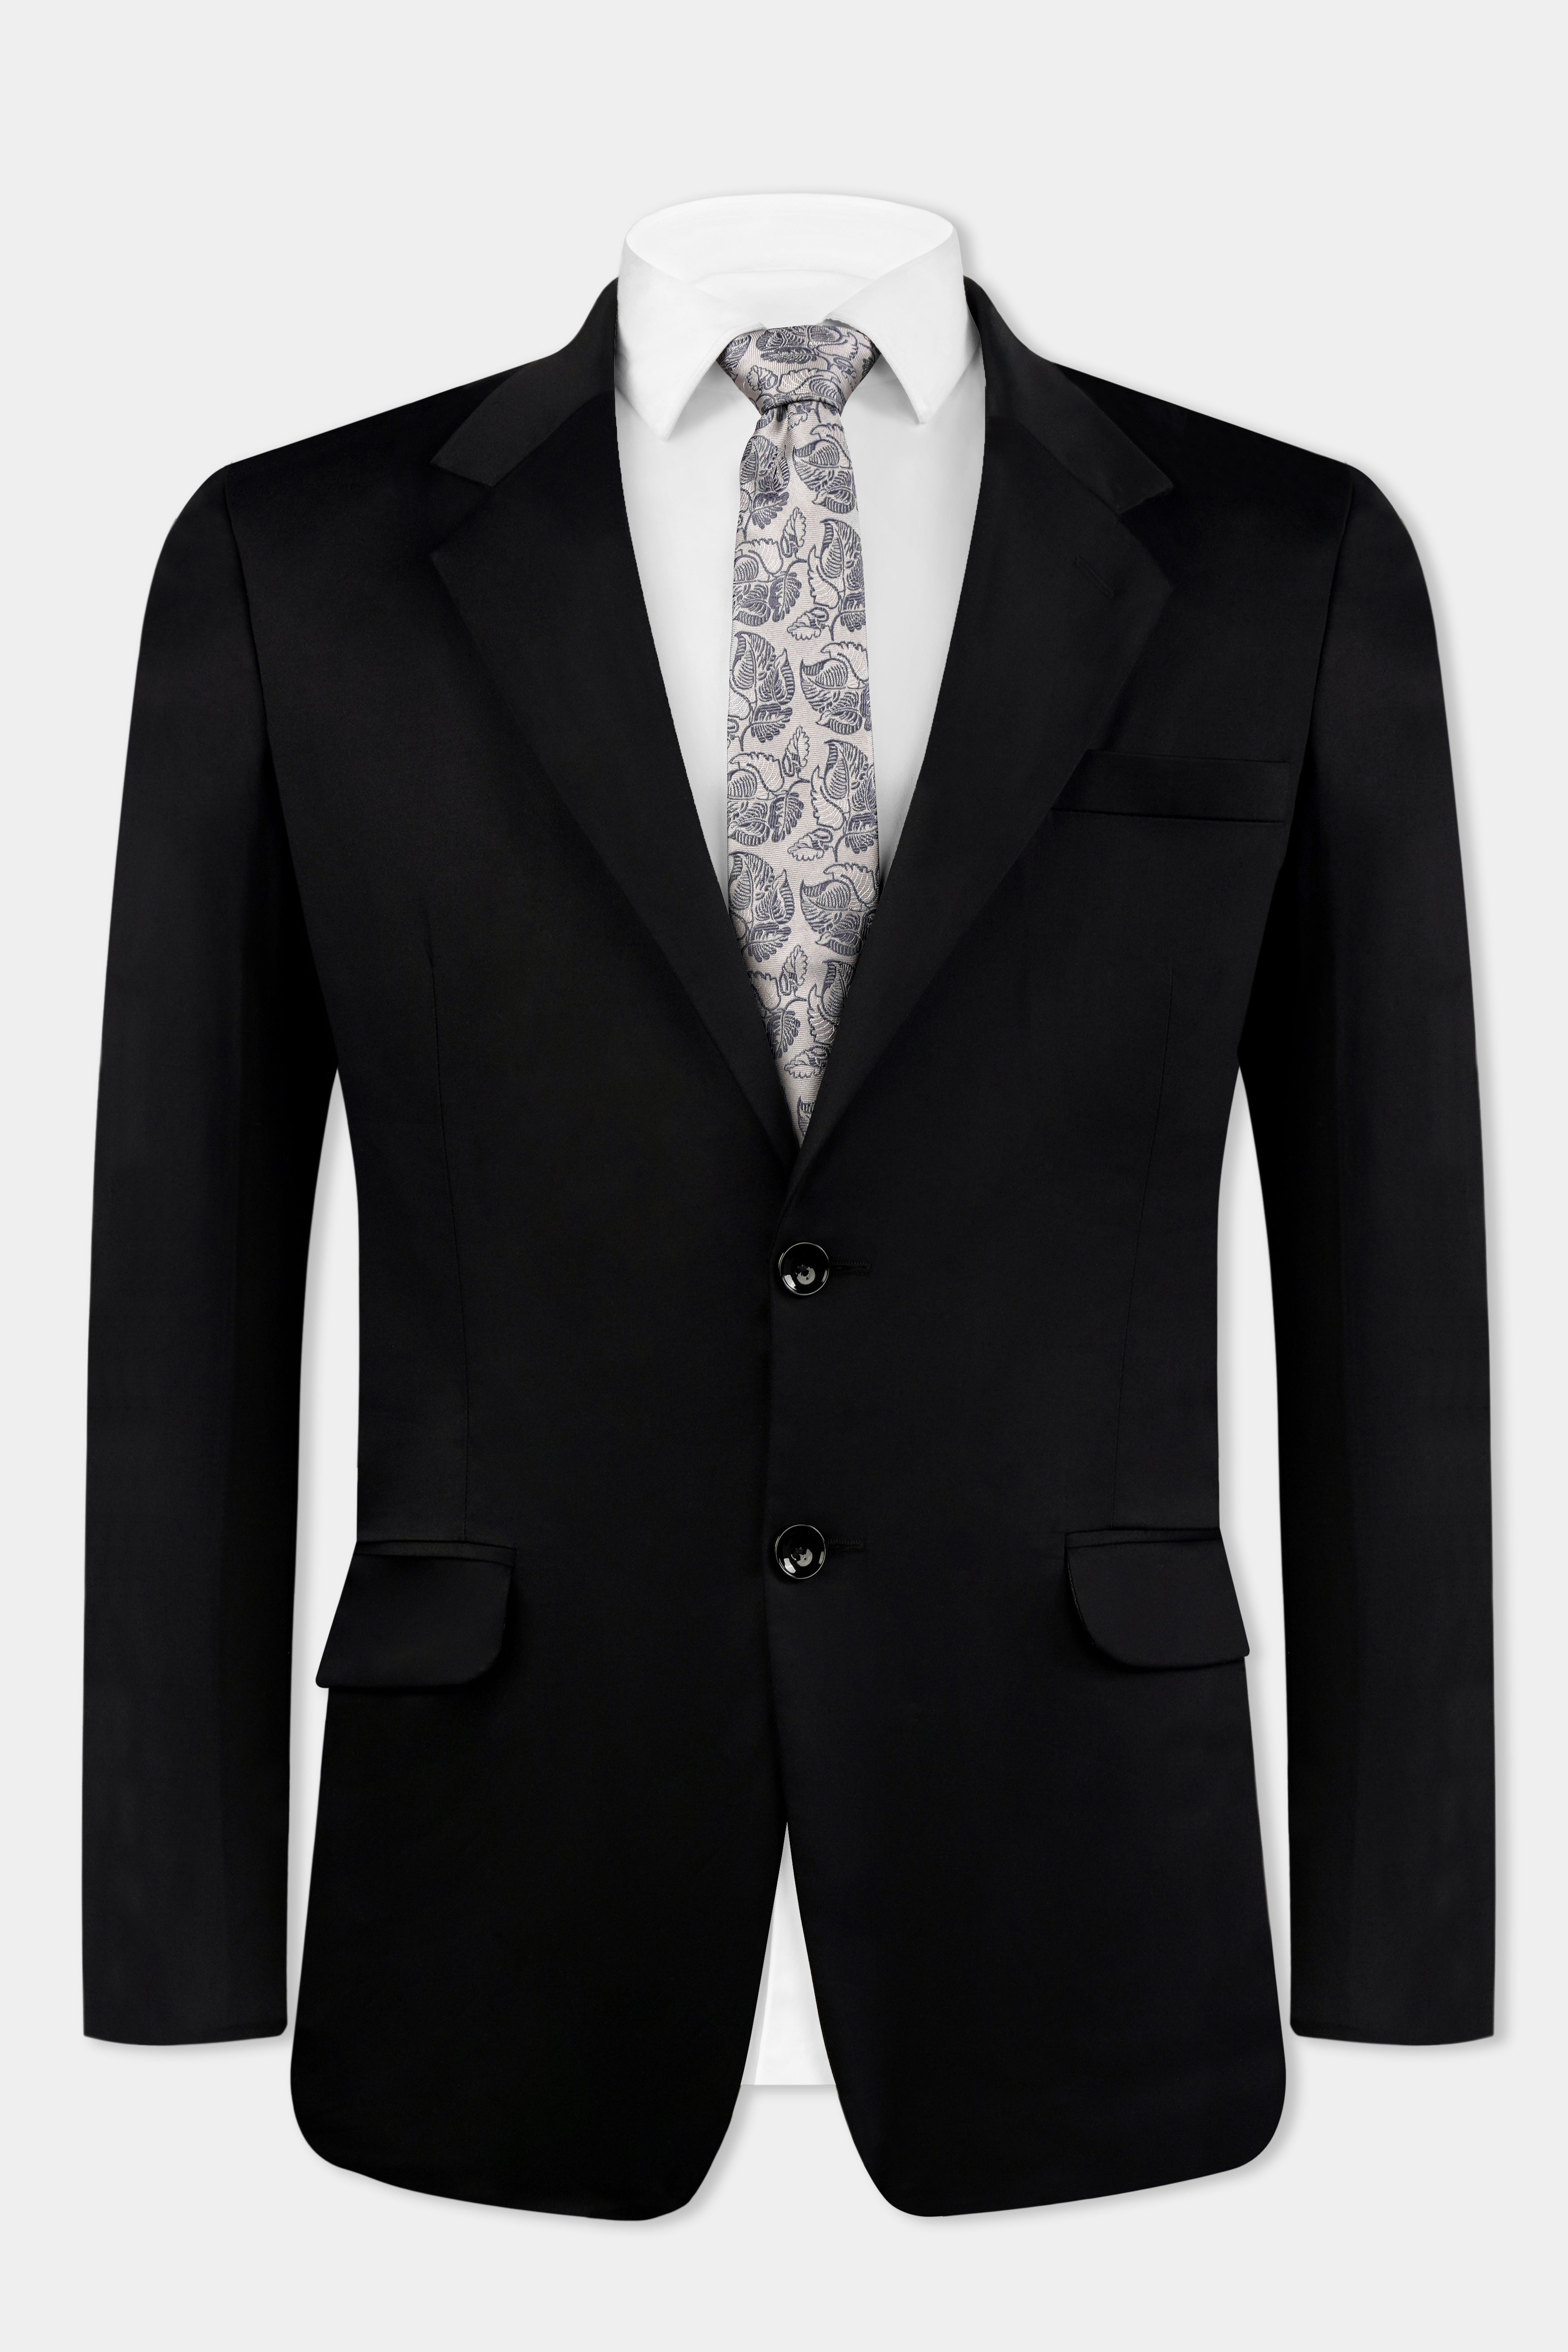 Buy Black Blazers For Men Online in India At Best Prices